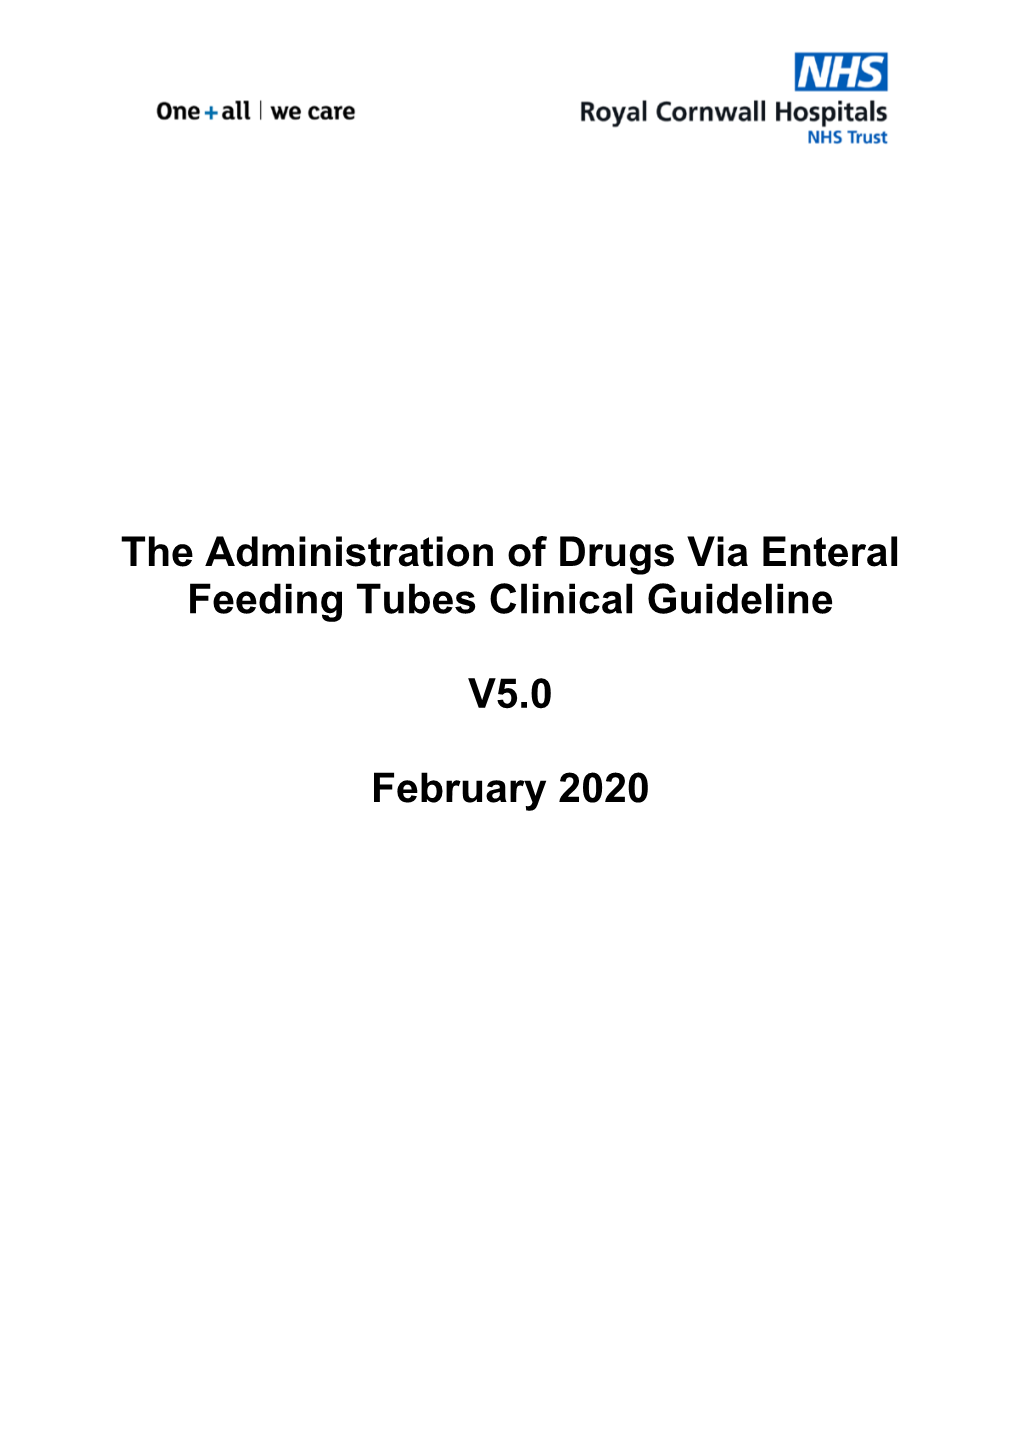 The Administration of Drugs Via Enteral Feeding Tubes Clinical Guideline